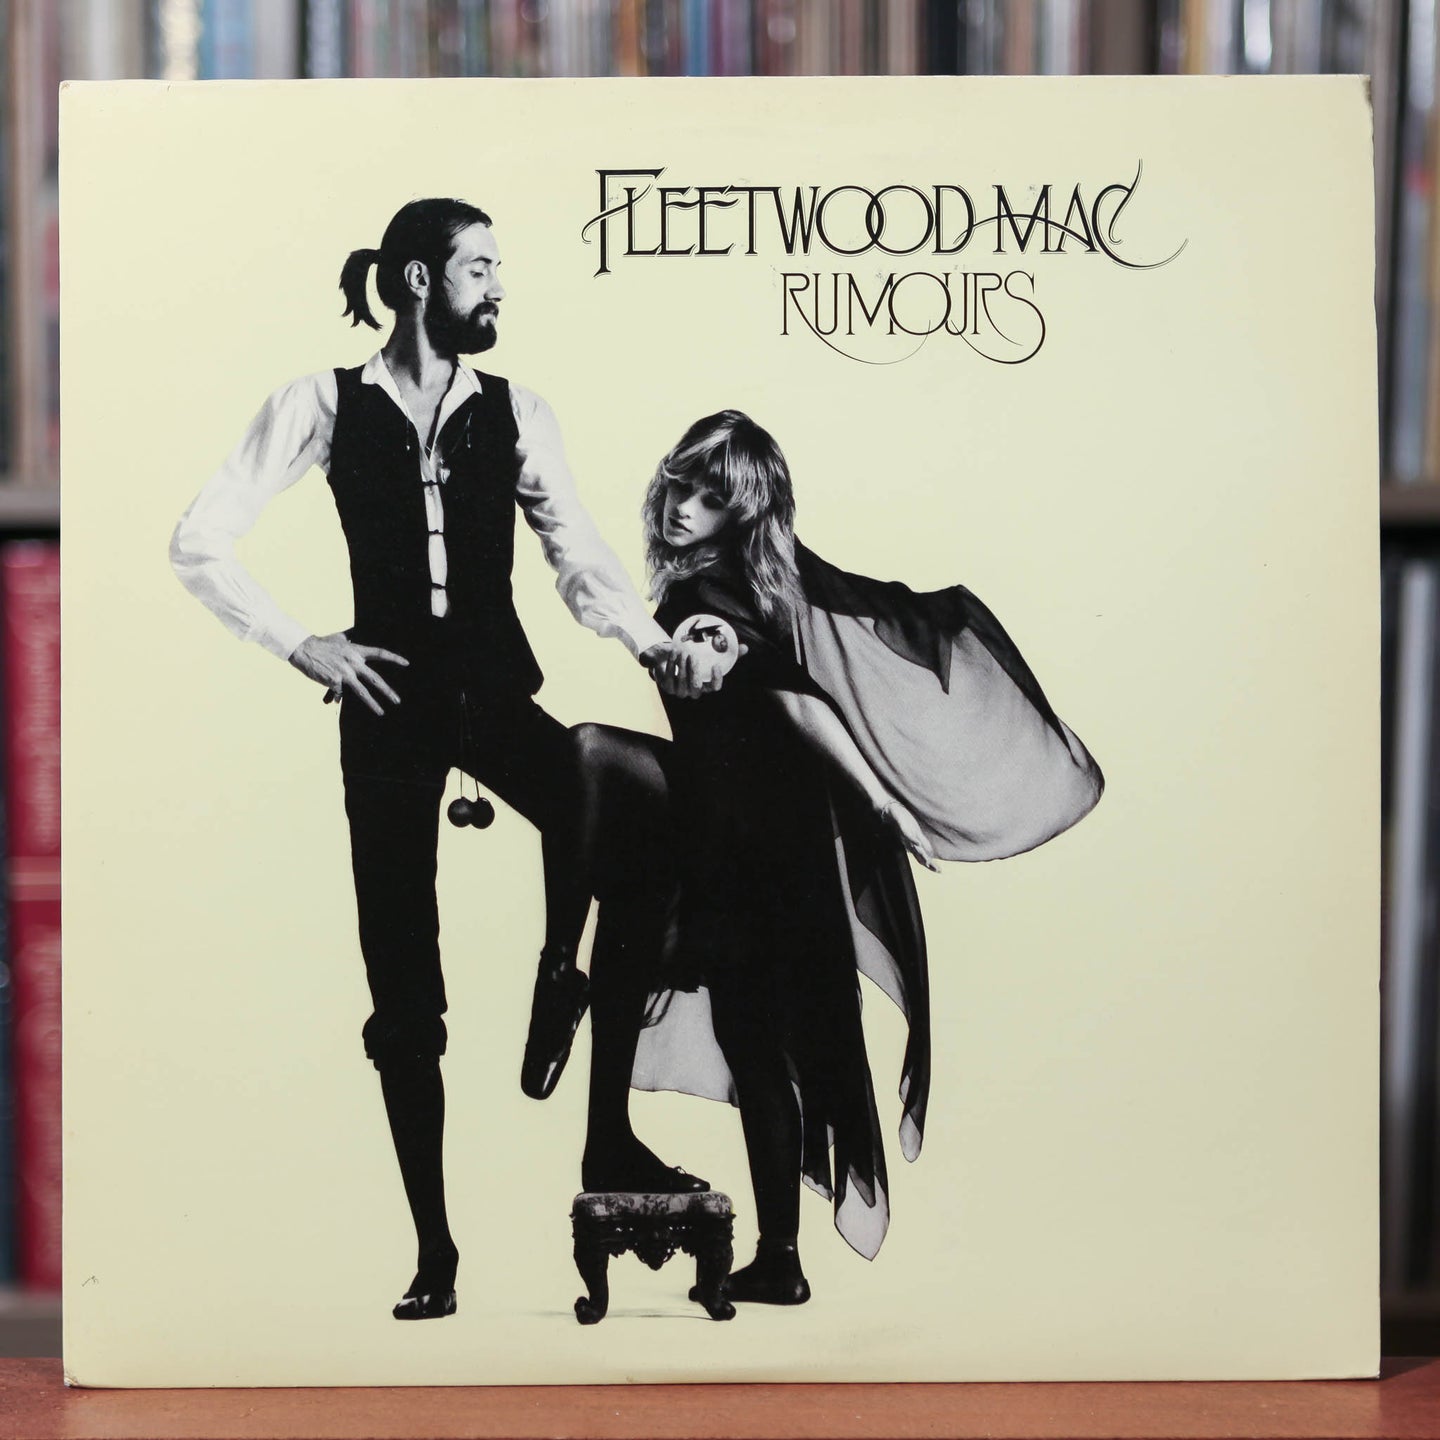 The story behind Fleetwood Mac's 'Rumours' cover art